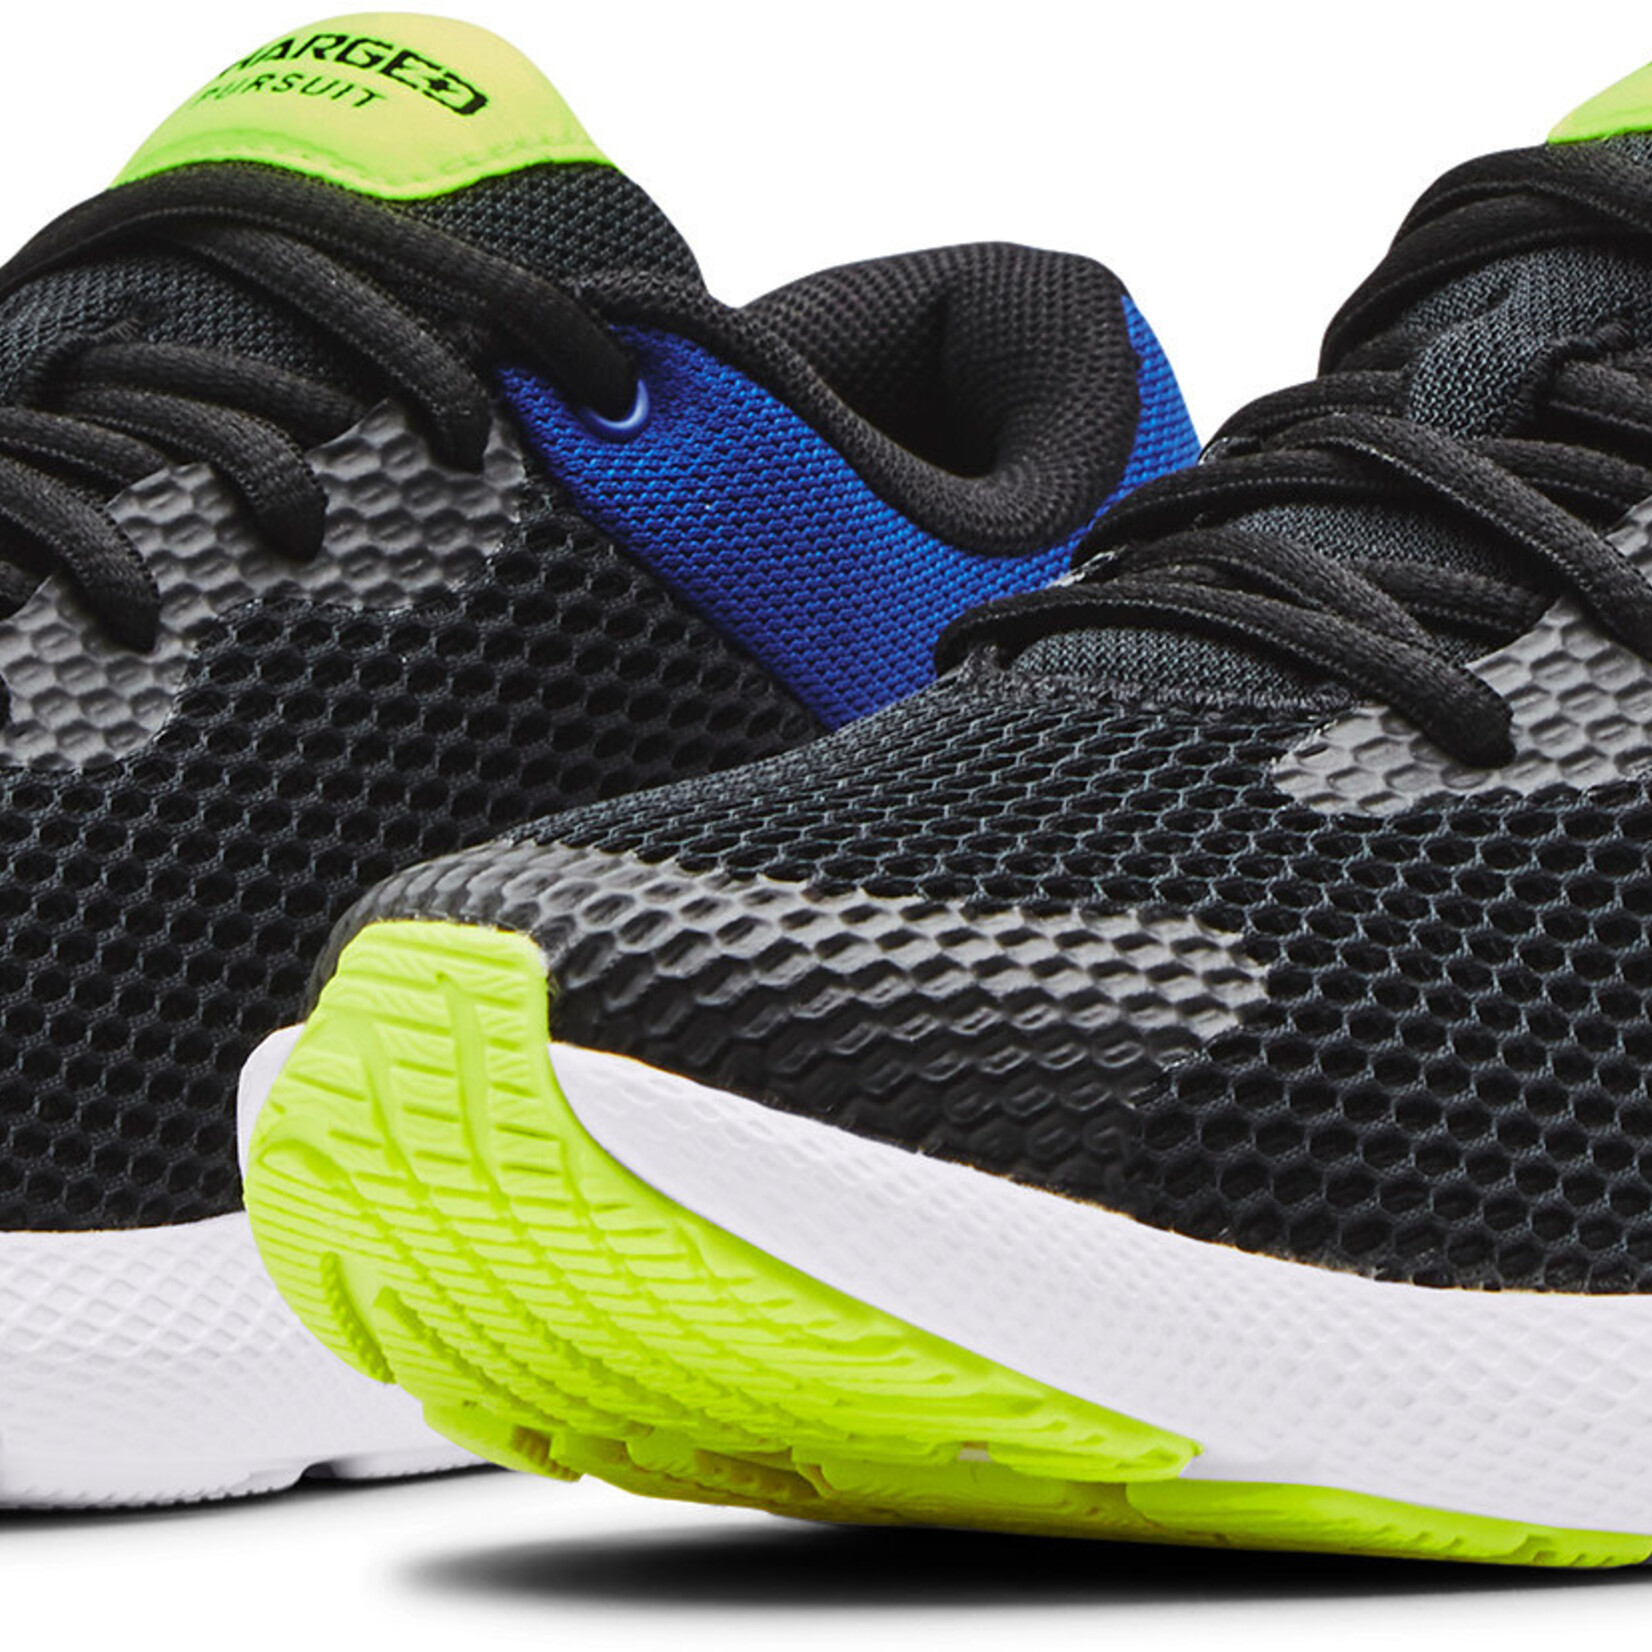 Under Armour Under Armour Running Shoes, Charged Pursuit 2, Boys